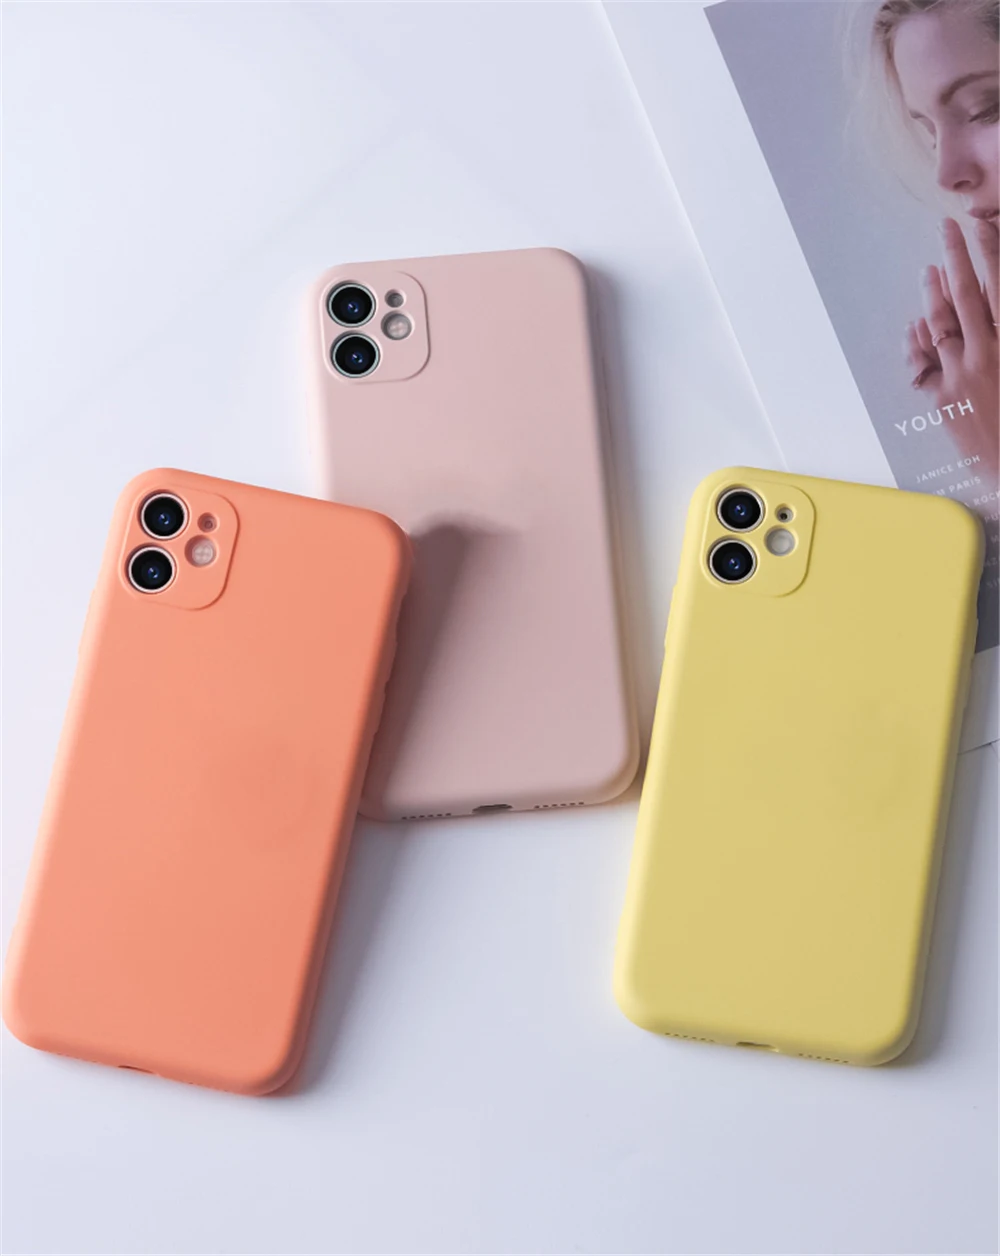 Liquid Silicone Phone Case For iPhone 13 11 Pro XS Max XR X Original Soft Protection Cover For iPhone 12 Mini 7 8 Plus SE 2020 iphone 11 Pro Max  cover